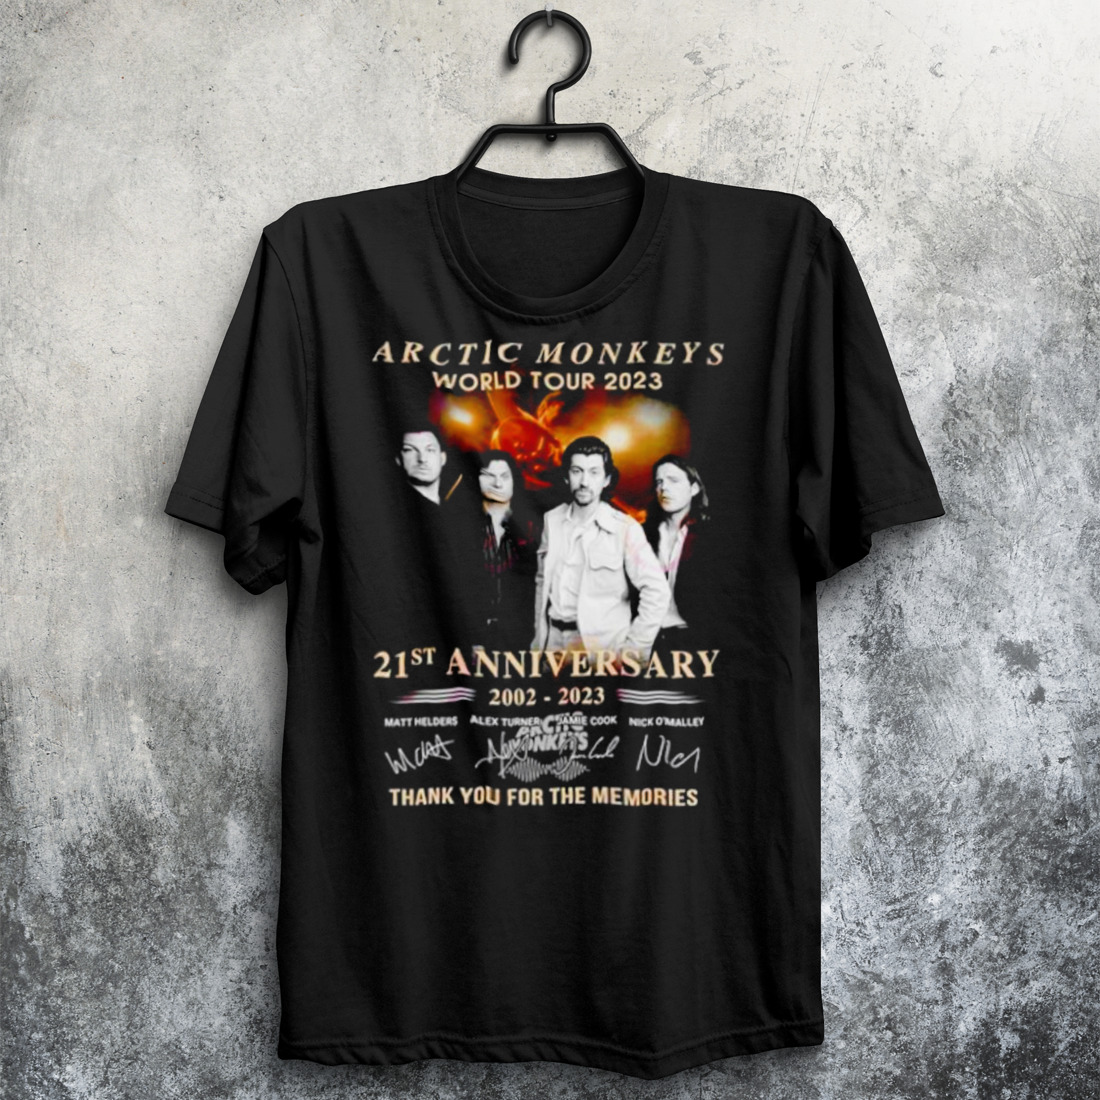 Arctic Monkeys World Tour 2023 21st anniversary 2002 – 2023 thank you for the memories shirt